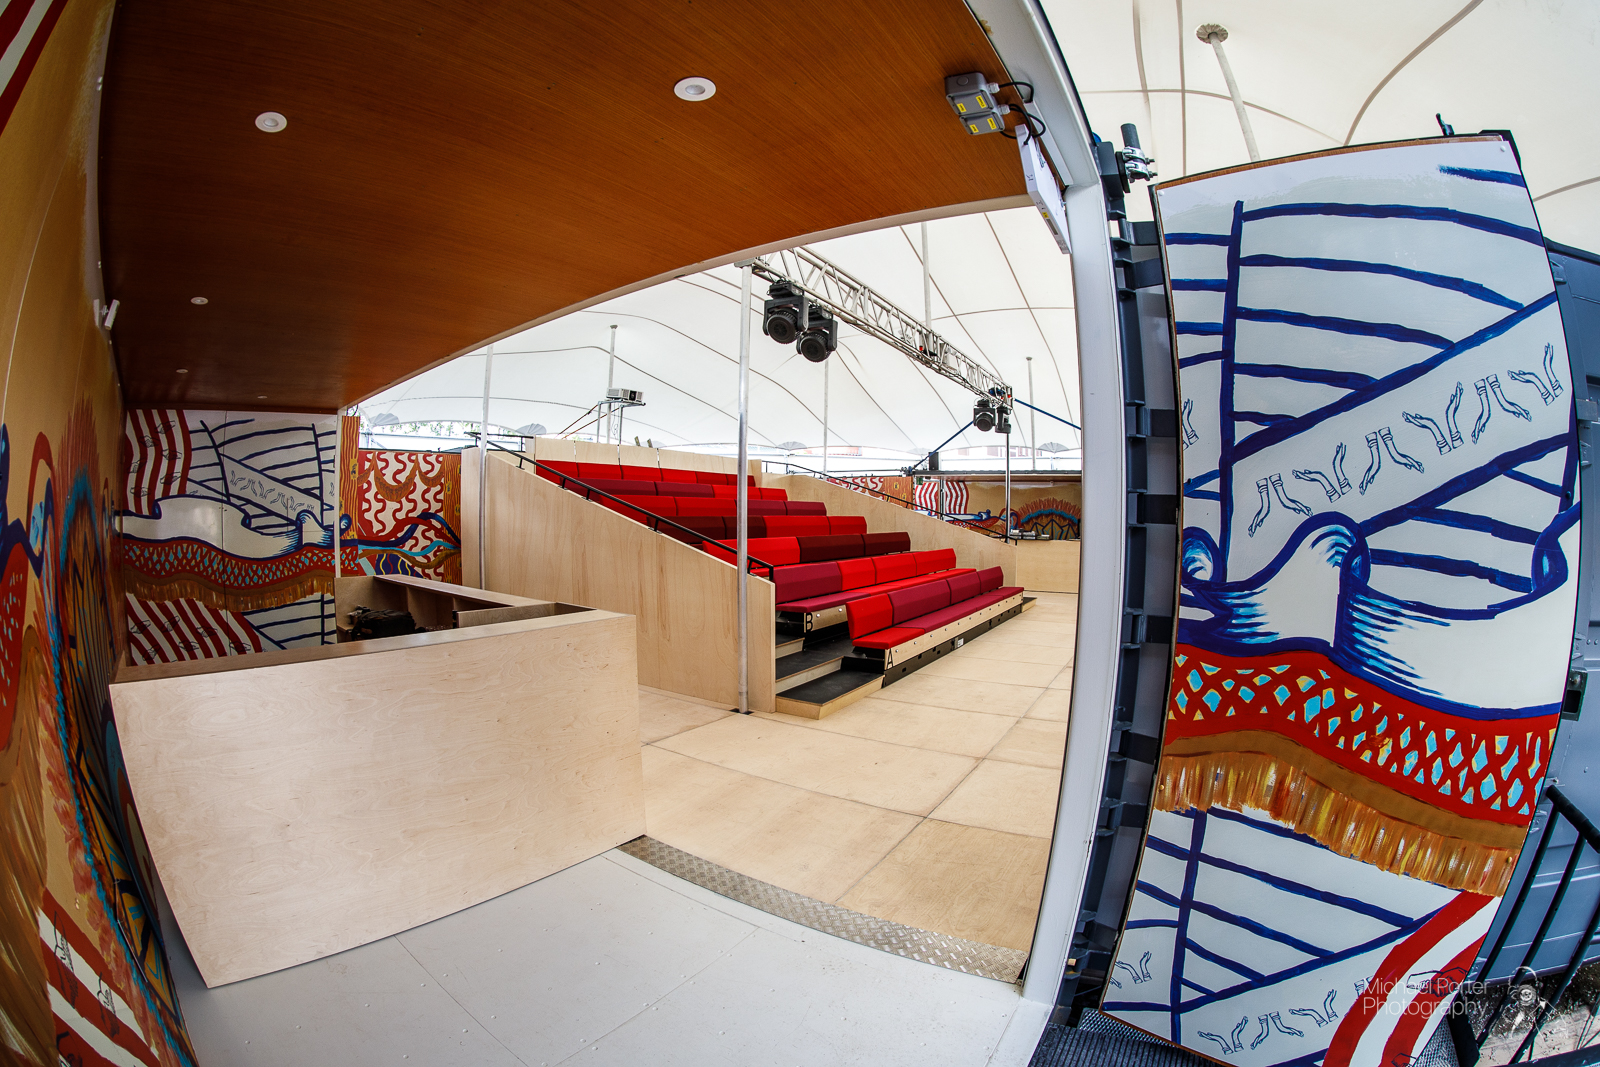 The inside of the mobile event tent. Red seating is visible and the walls have been painted with colourful patterns.